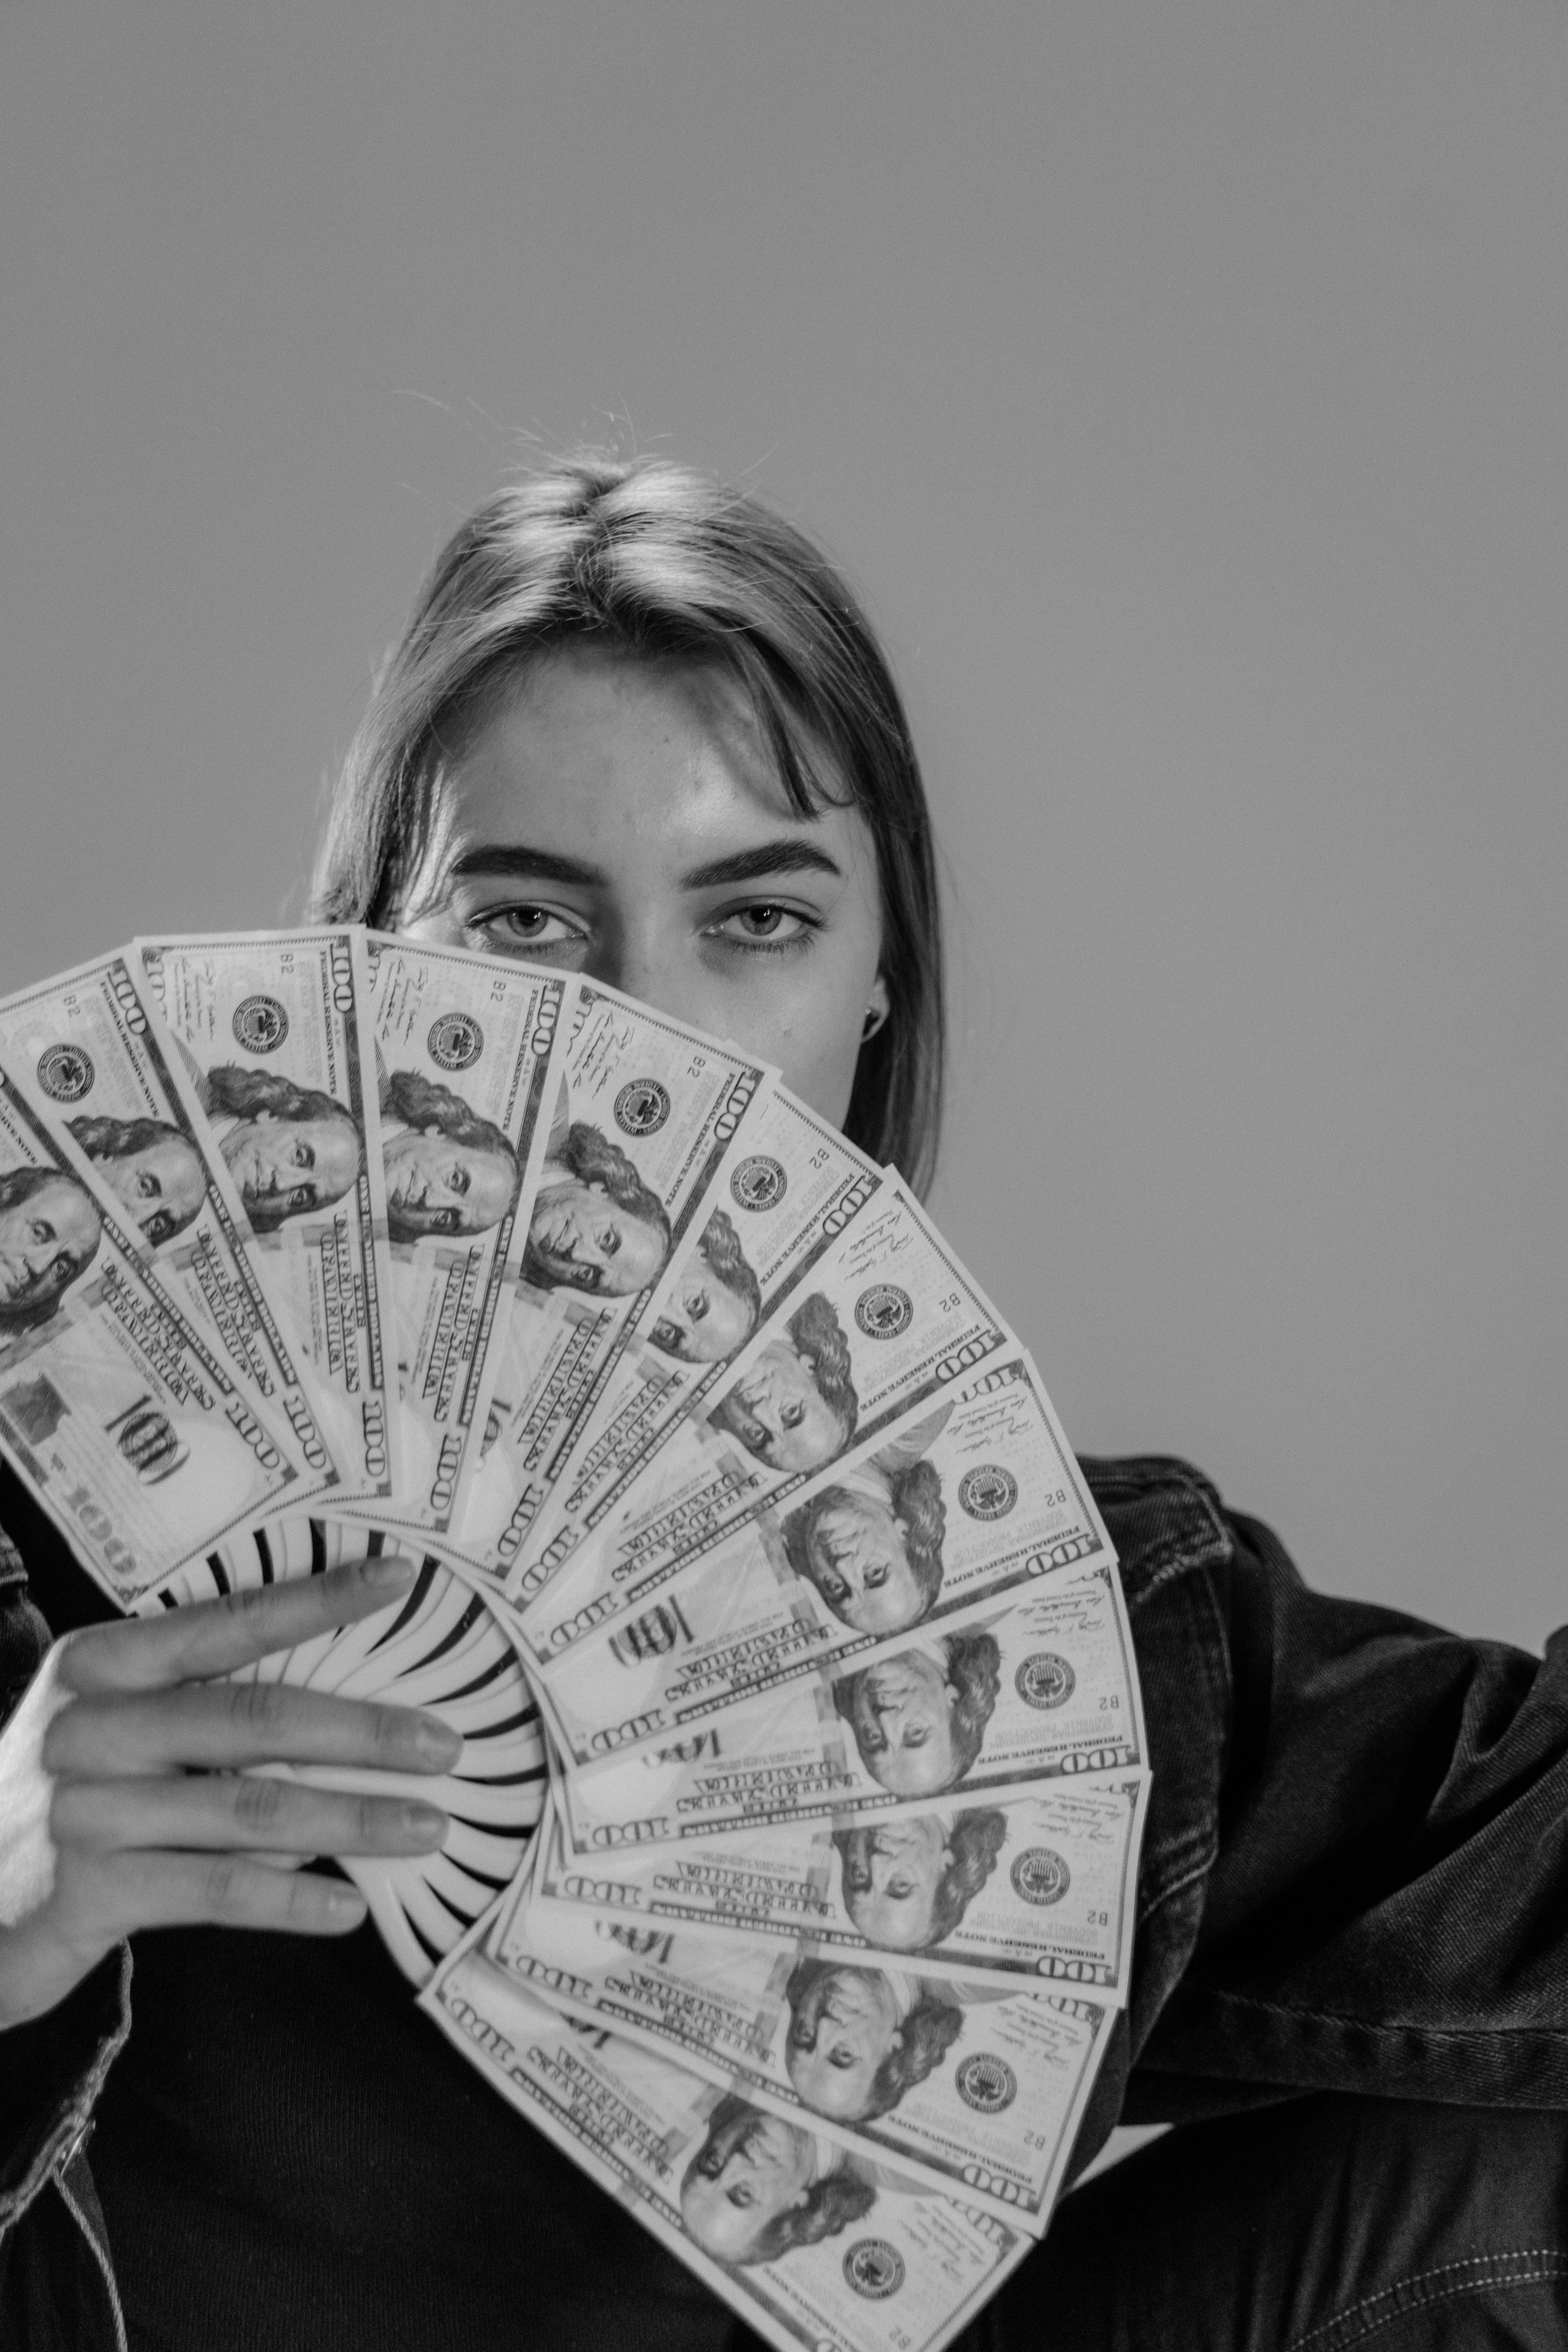 A woman holding $100 bills like a fan covering part of her face | Source: Pexels